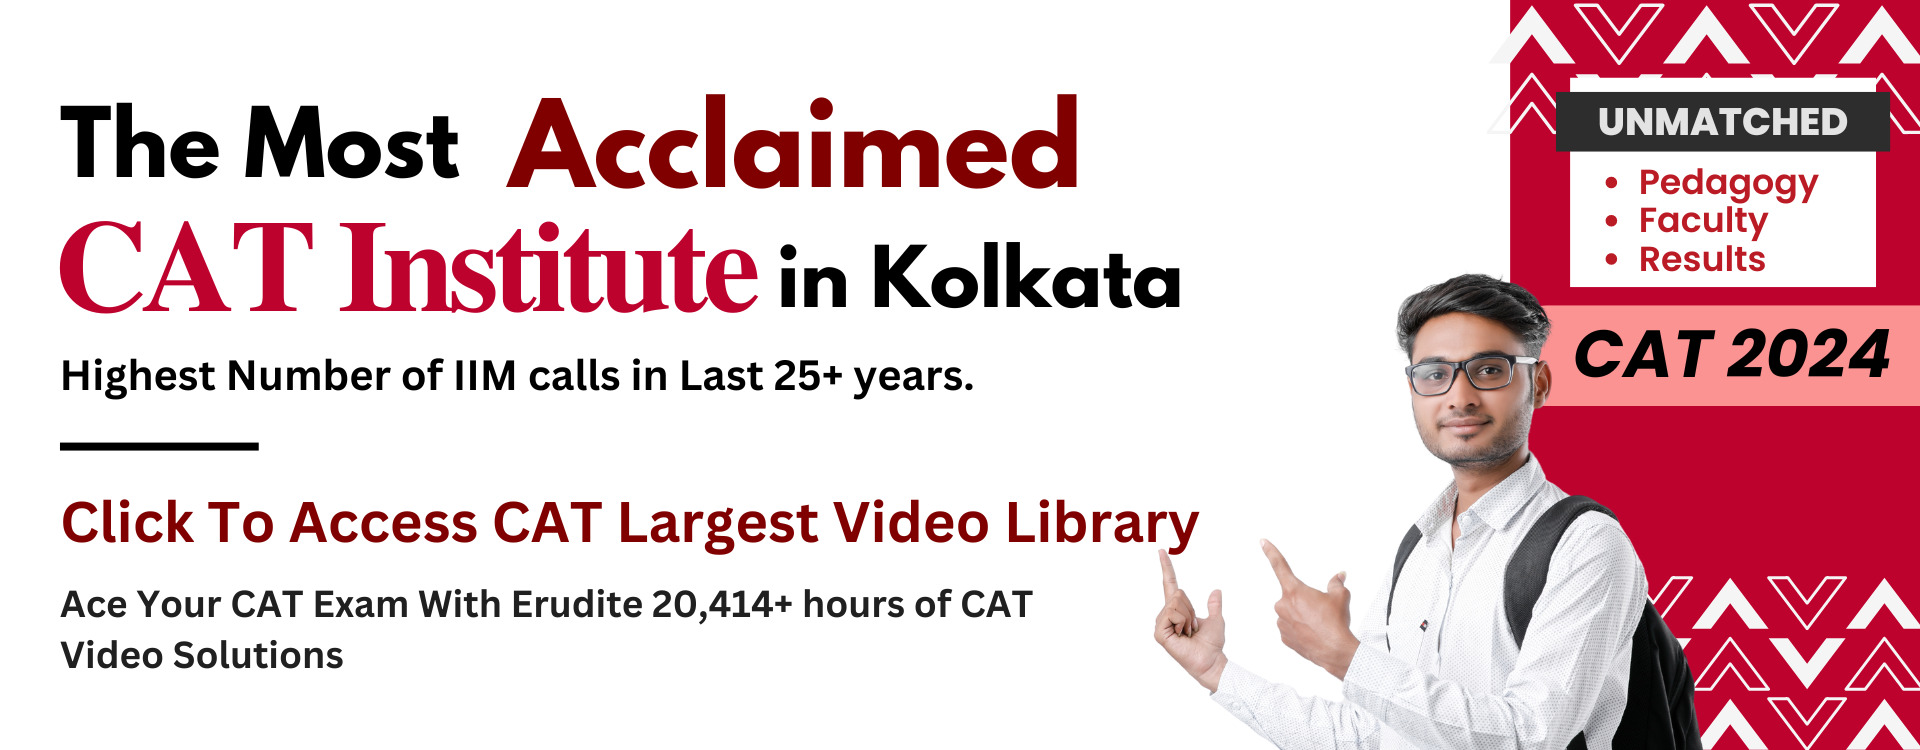 CAT Largest Video Library